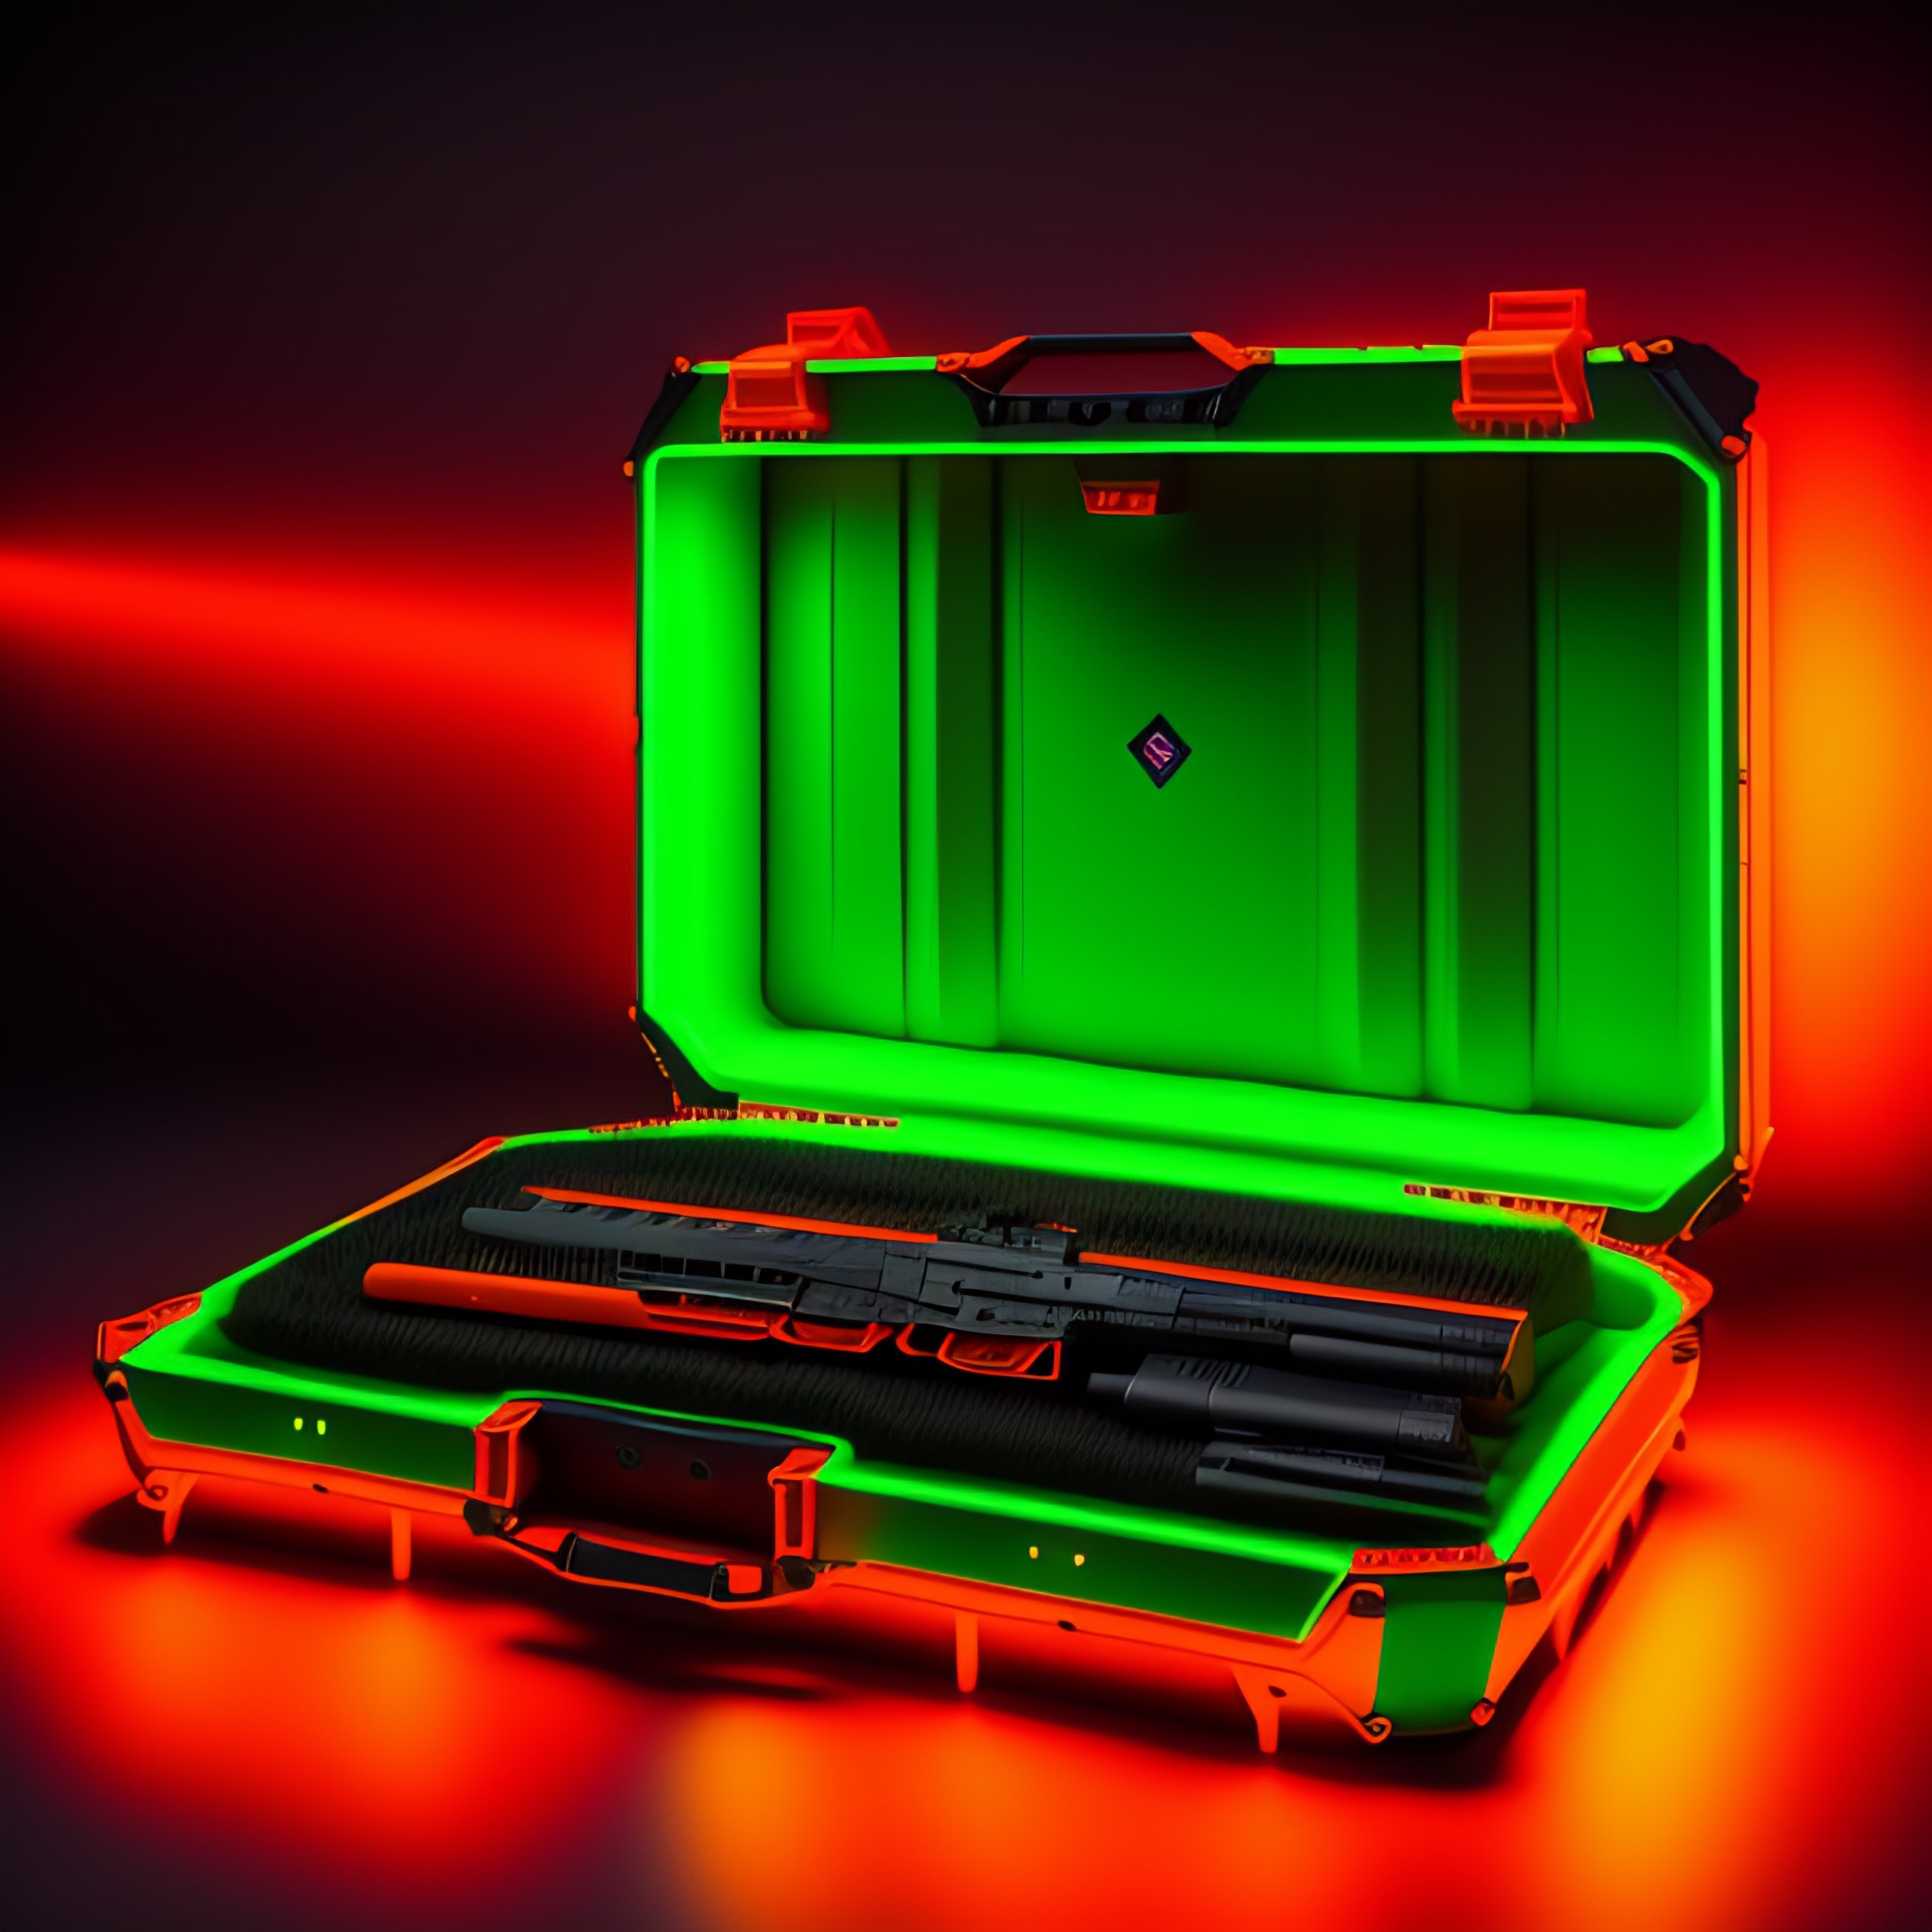 Lexica - CS-GO deluxe big gun box case, hollographic orange and green neon  details color, Knolling layout, Highly detailed, Depth, Lumen render, 8k